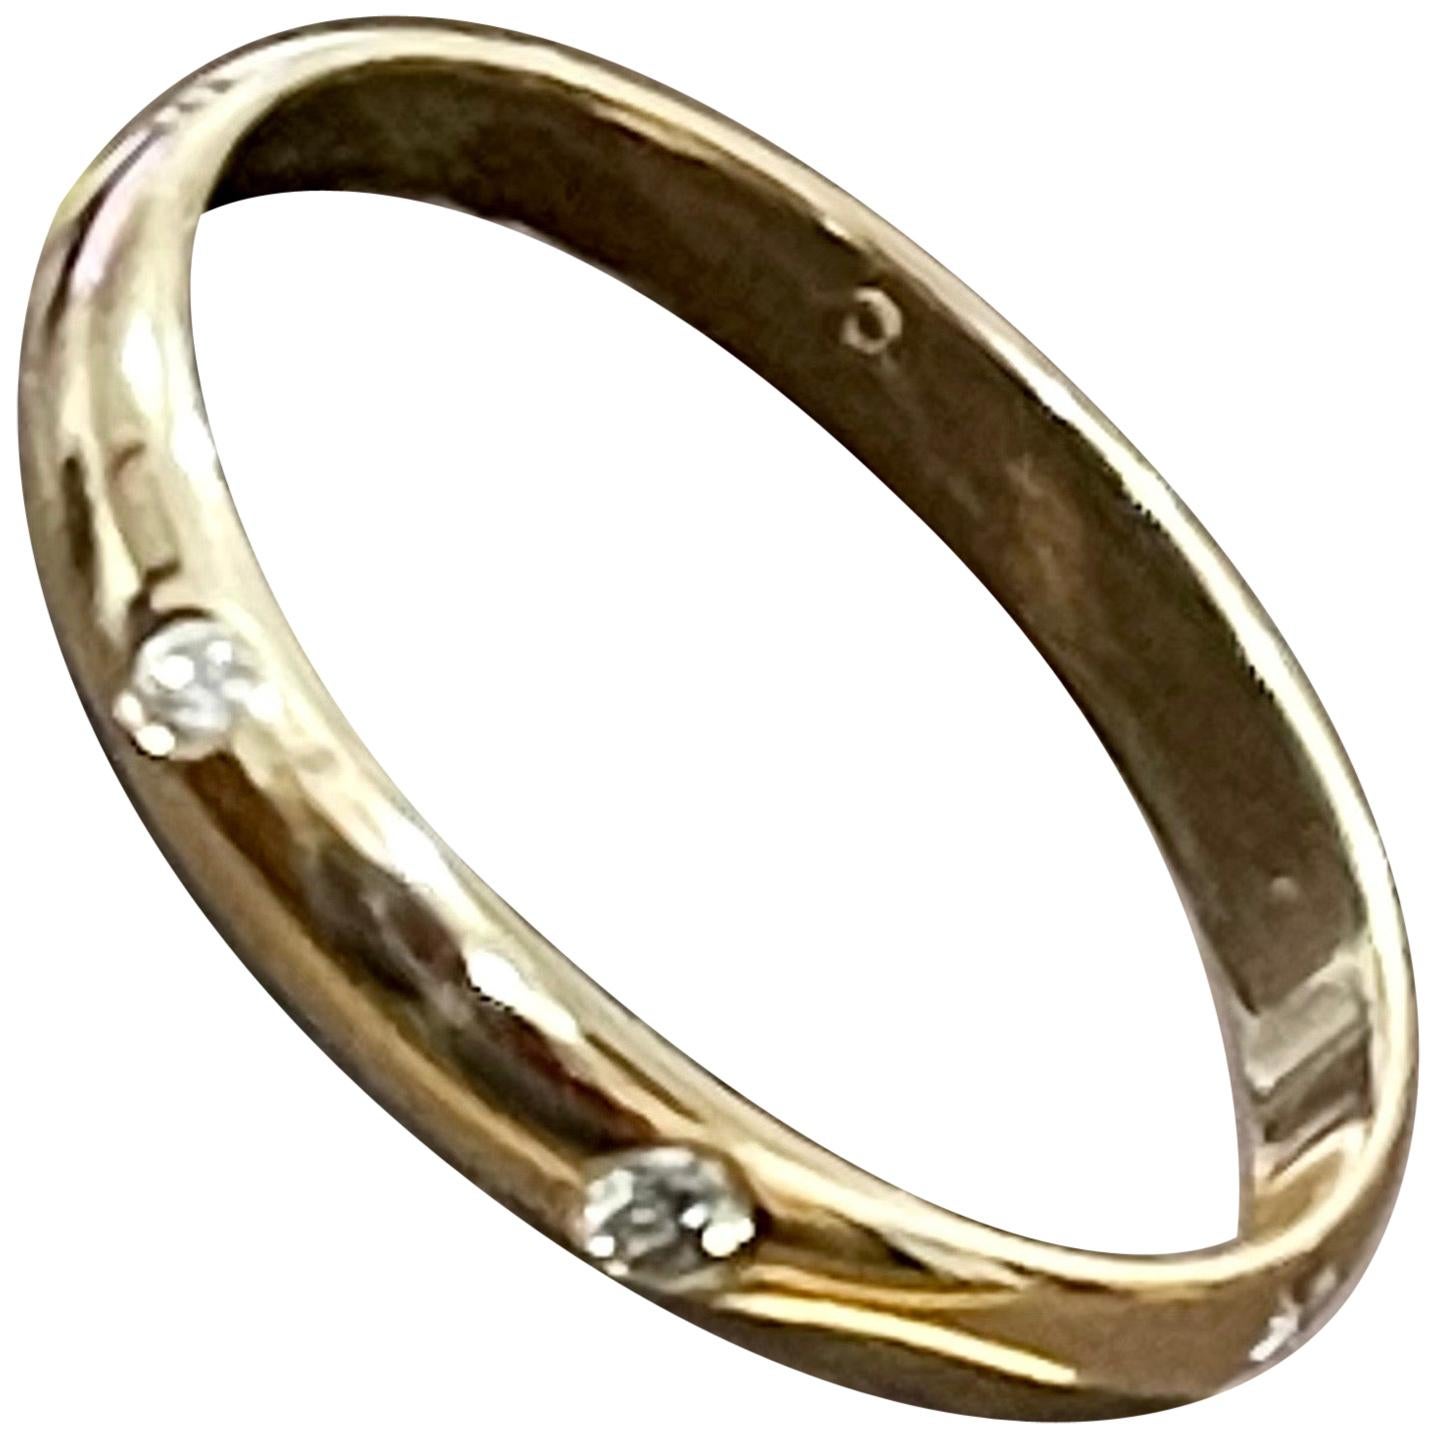 6 Flush Set Bezel Diamond Eternity Wedding Band in 14 Karat Yellow Gold Size 8.2
Very clean and shiny diamonds.
This eternity band features Gypsy set or burnished, the bright white diamonds , 14k gold band ring shines brightly and is a perennial